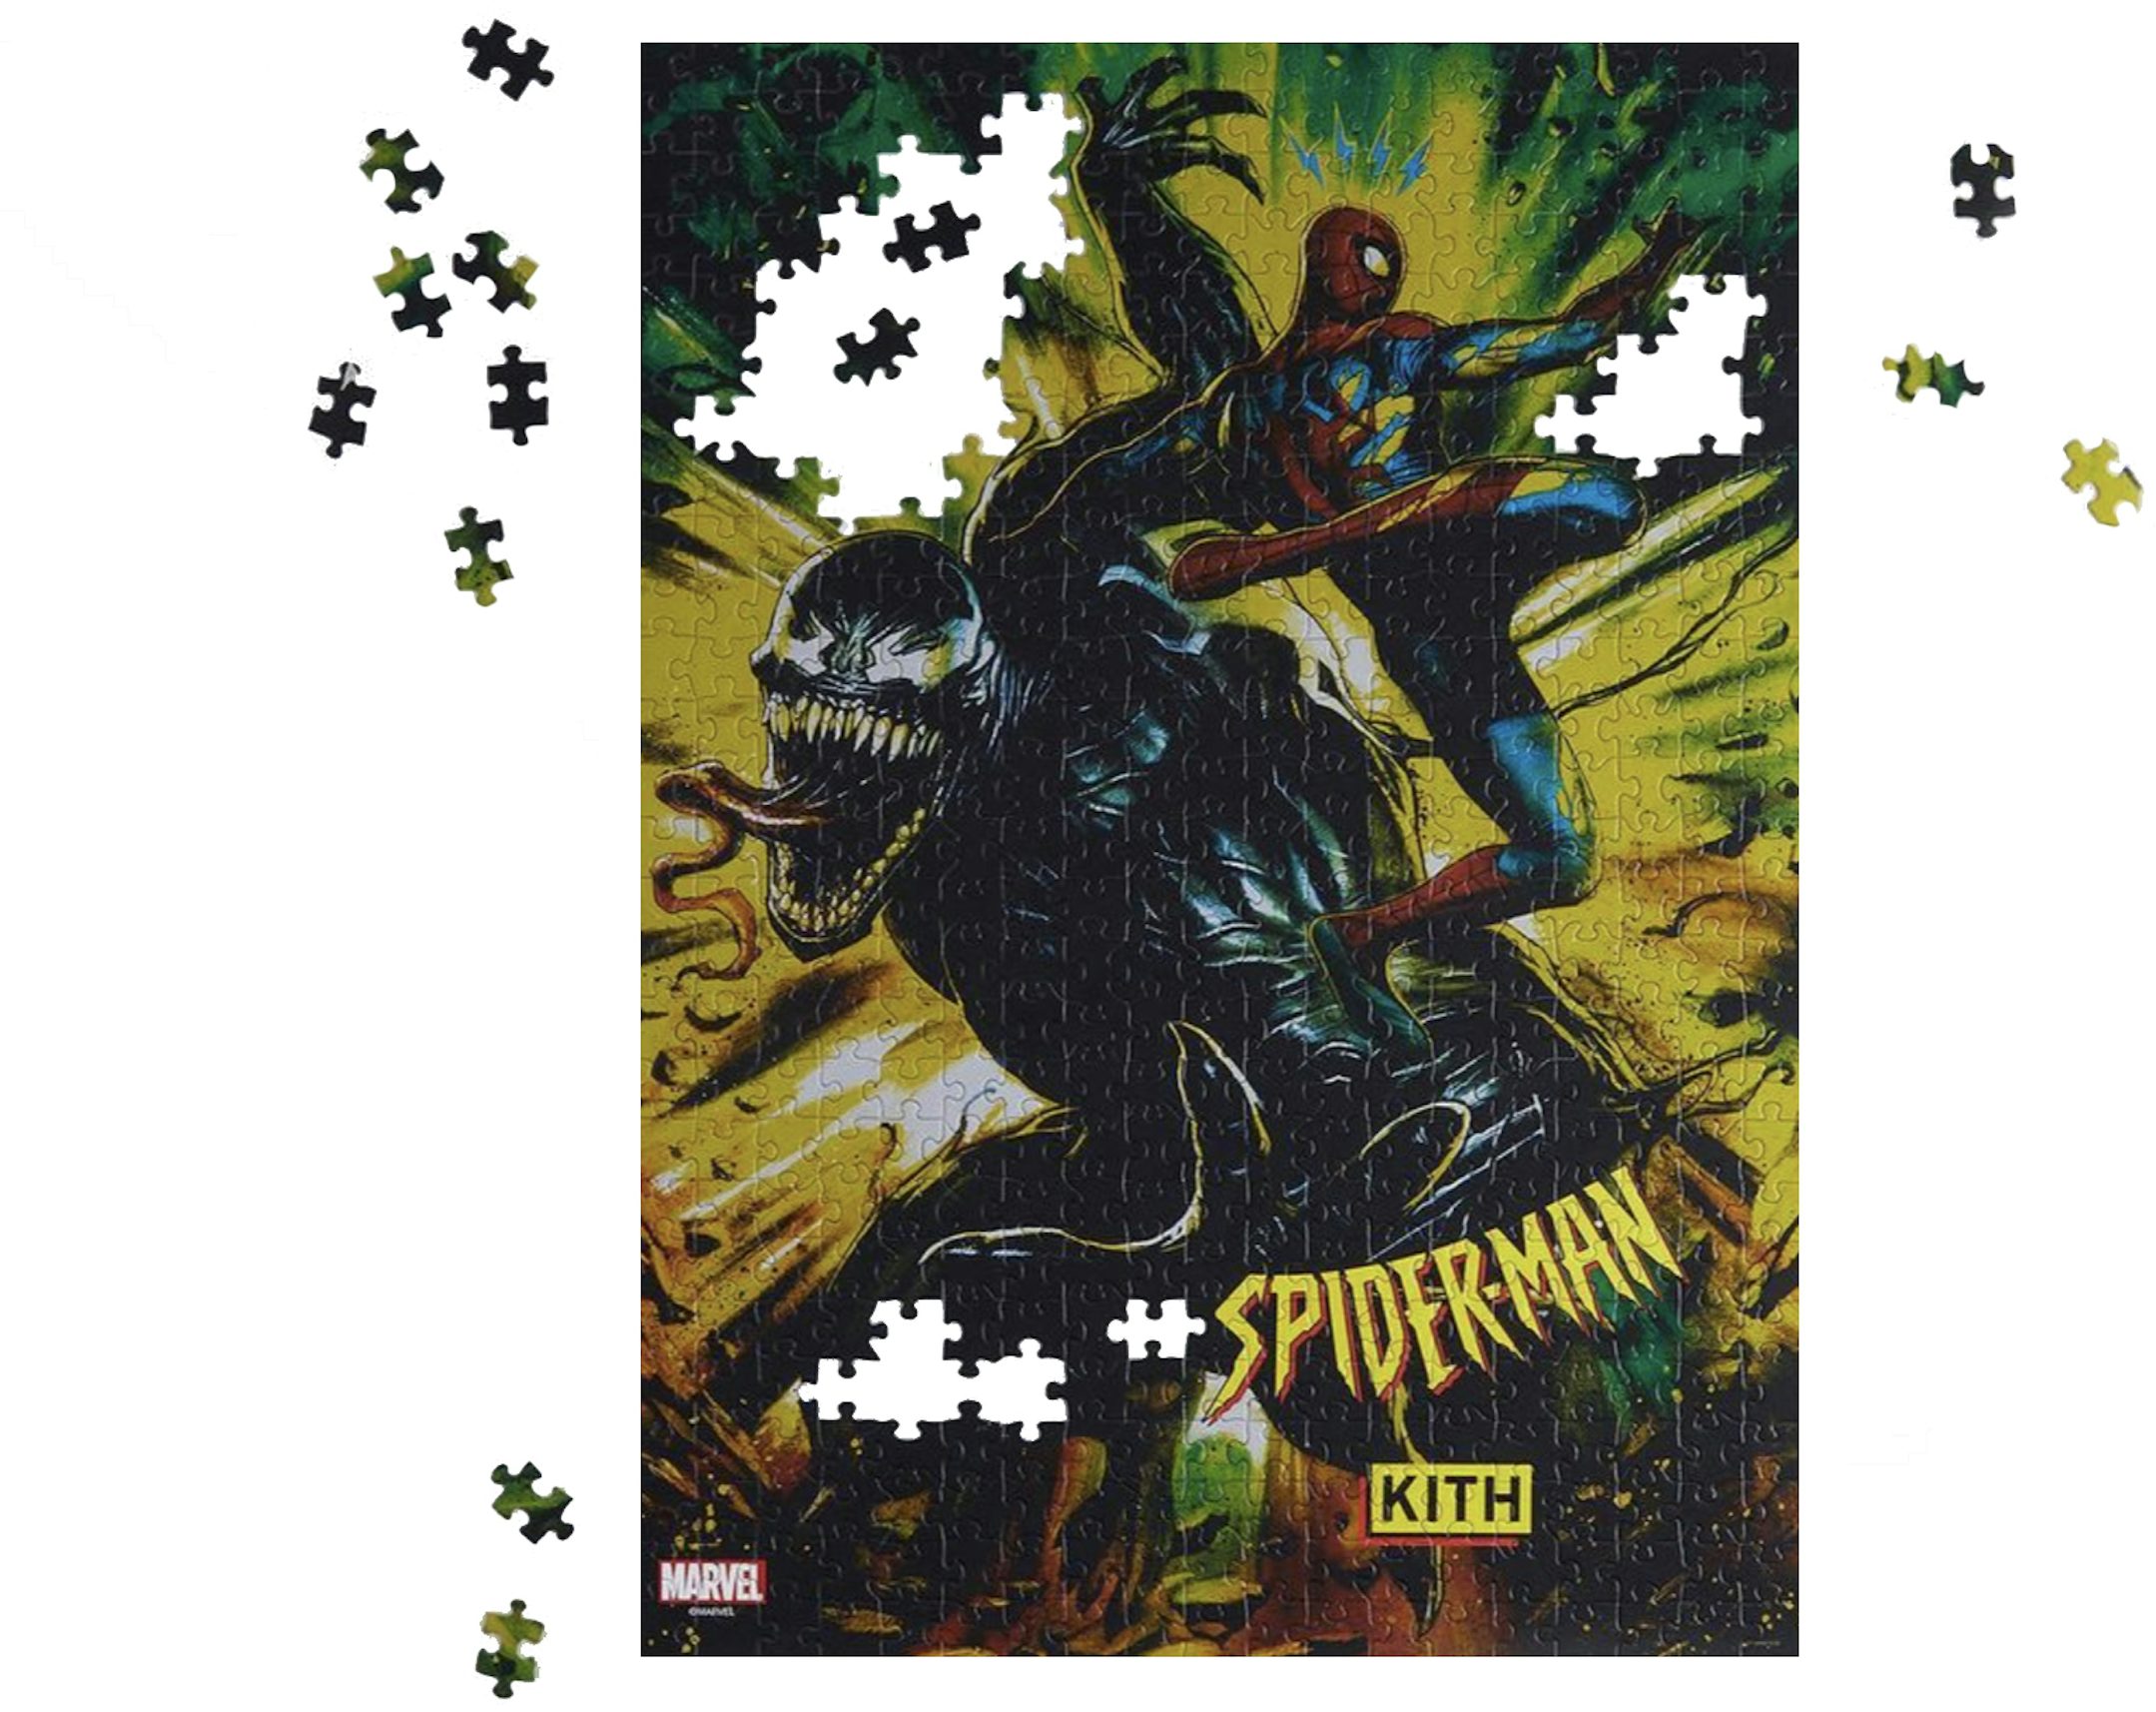 Frank Marvel Spider-Man Puzzle - 60 Piece Jigsaw Puzzle For Kids